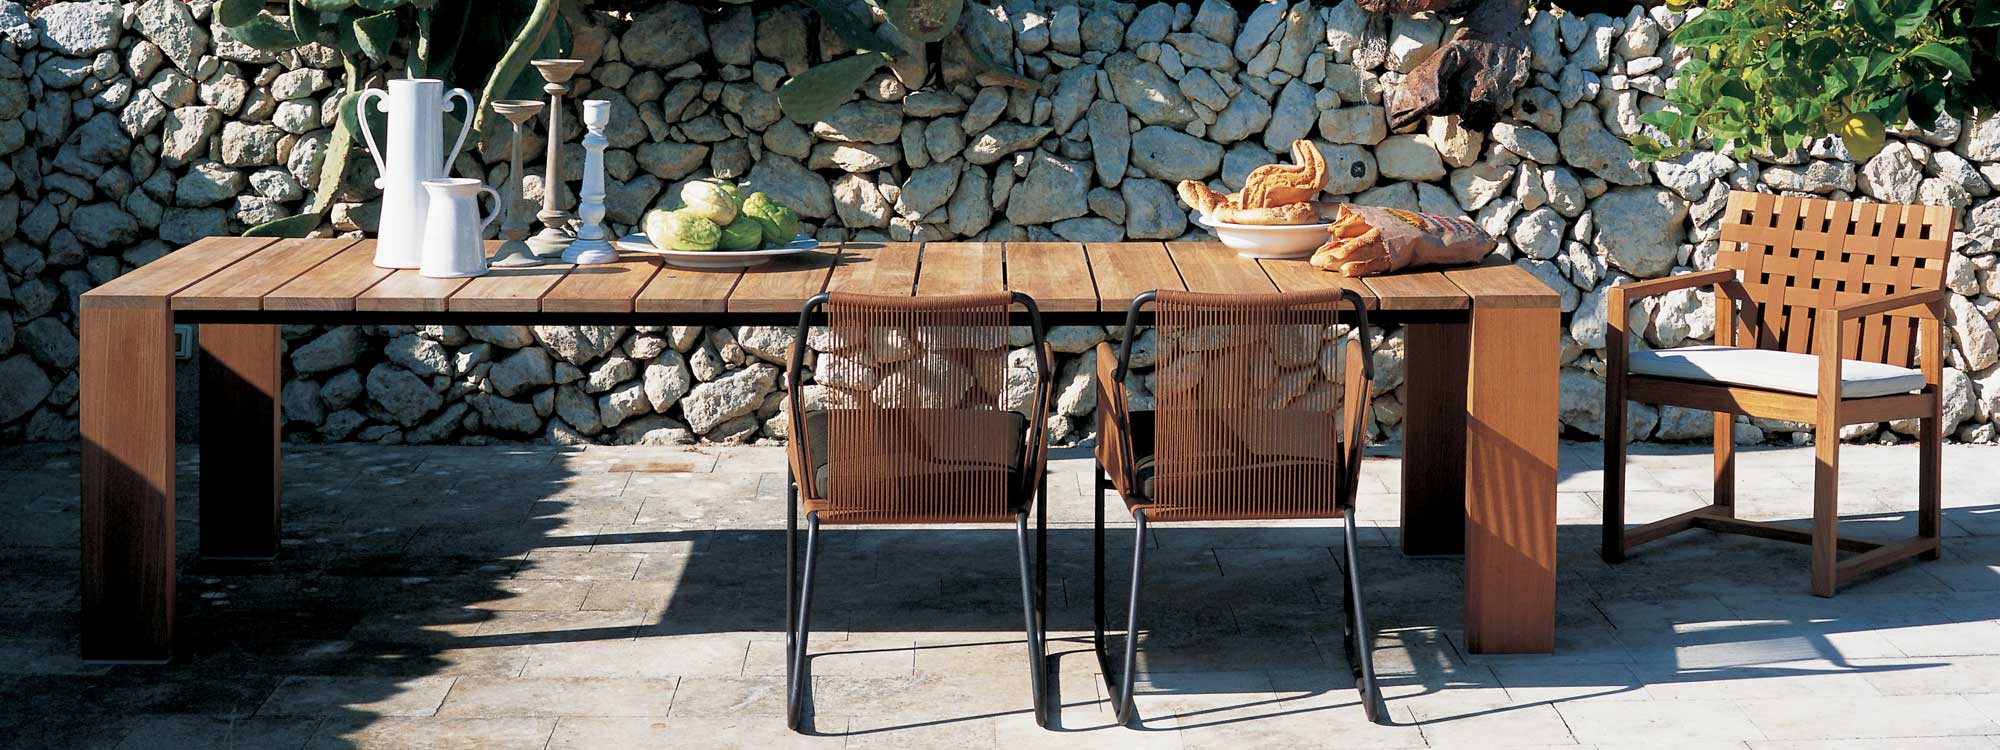 Pier teak garden table with Harp & Network chairs in front of drystone wall